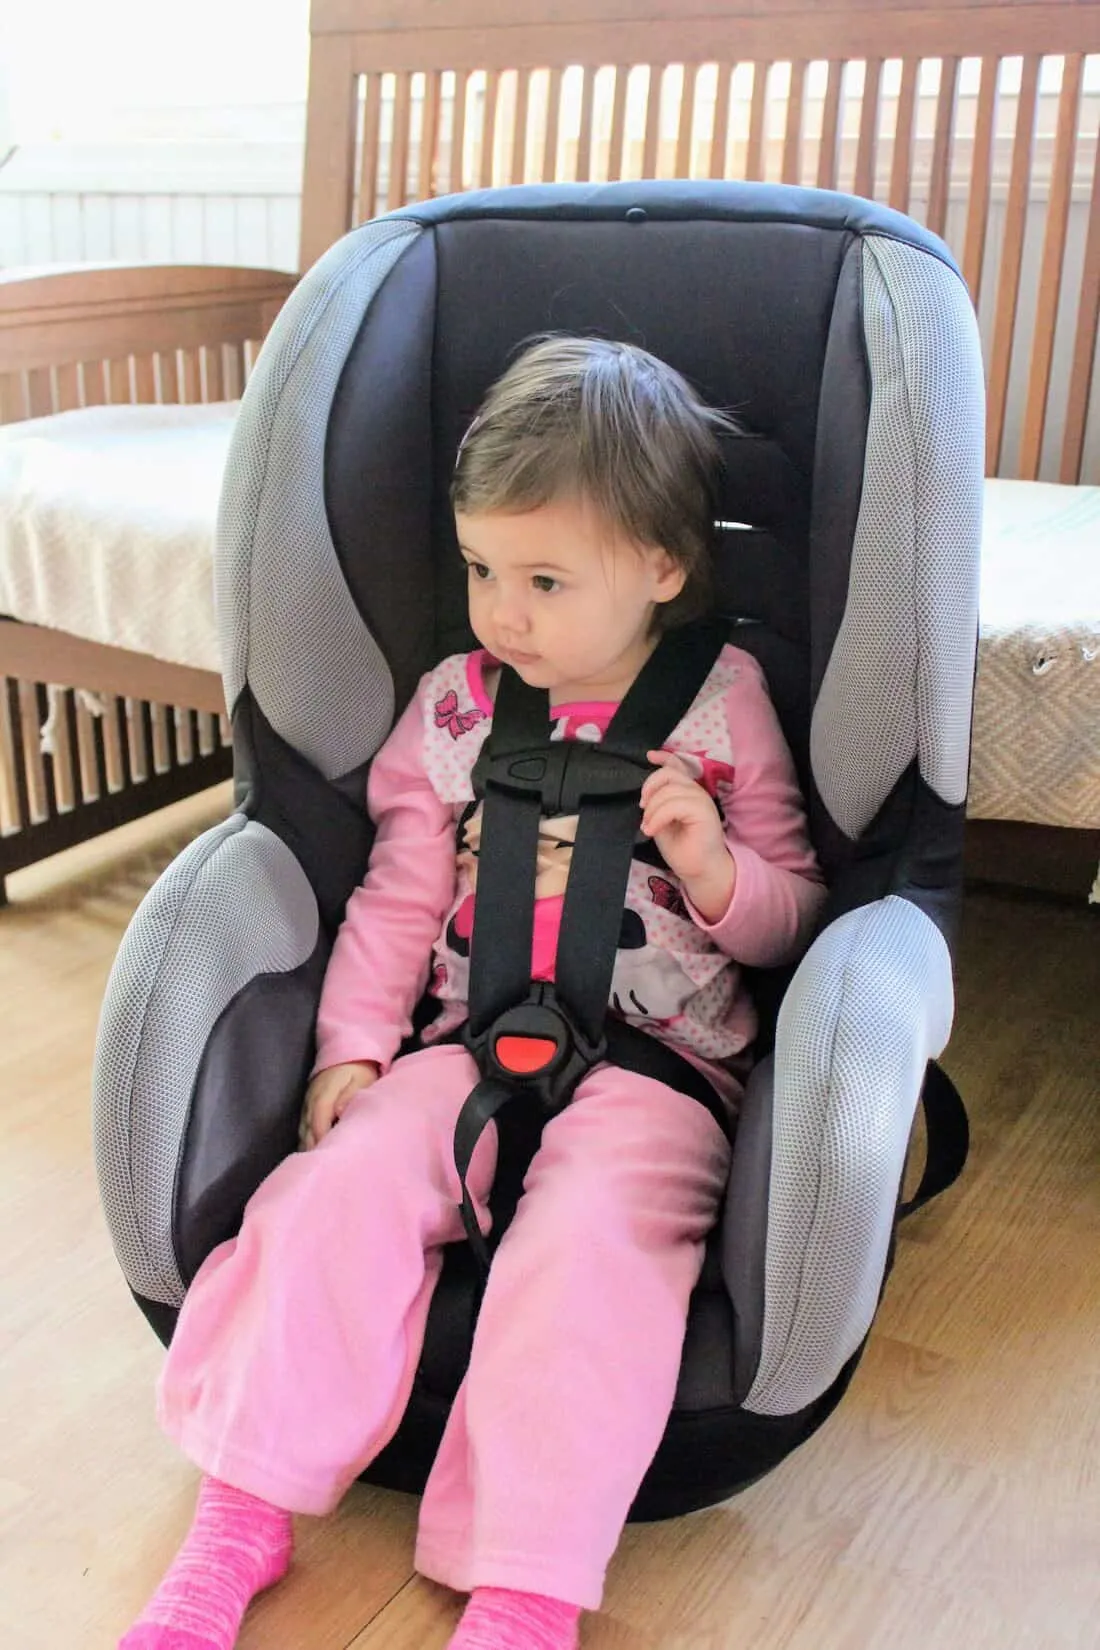 Toddler girl is strapped into carseat.